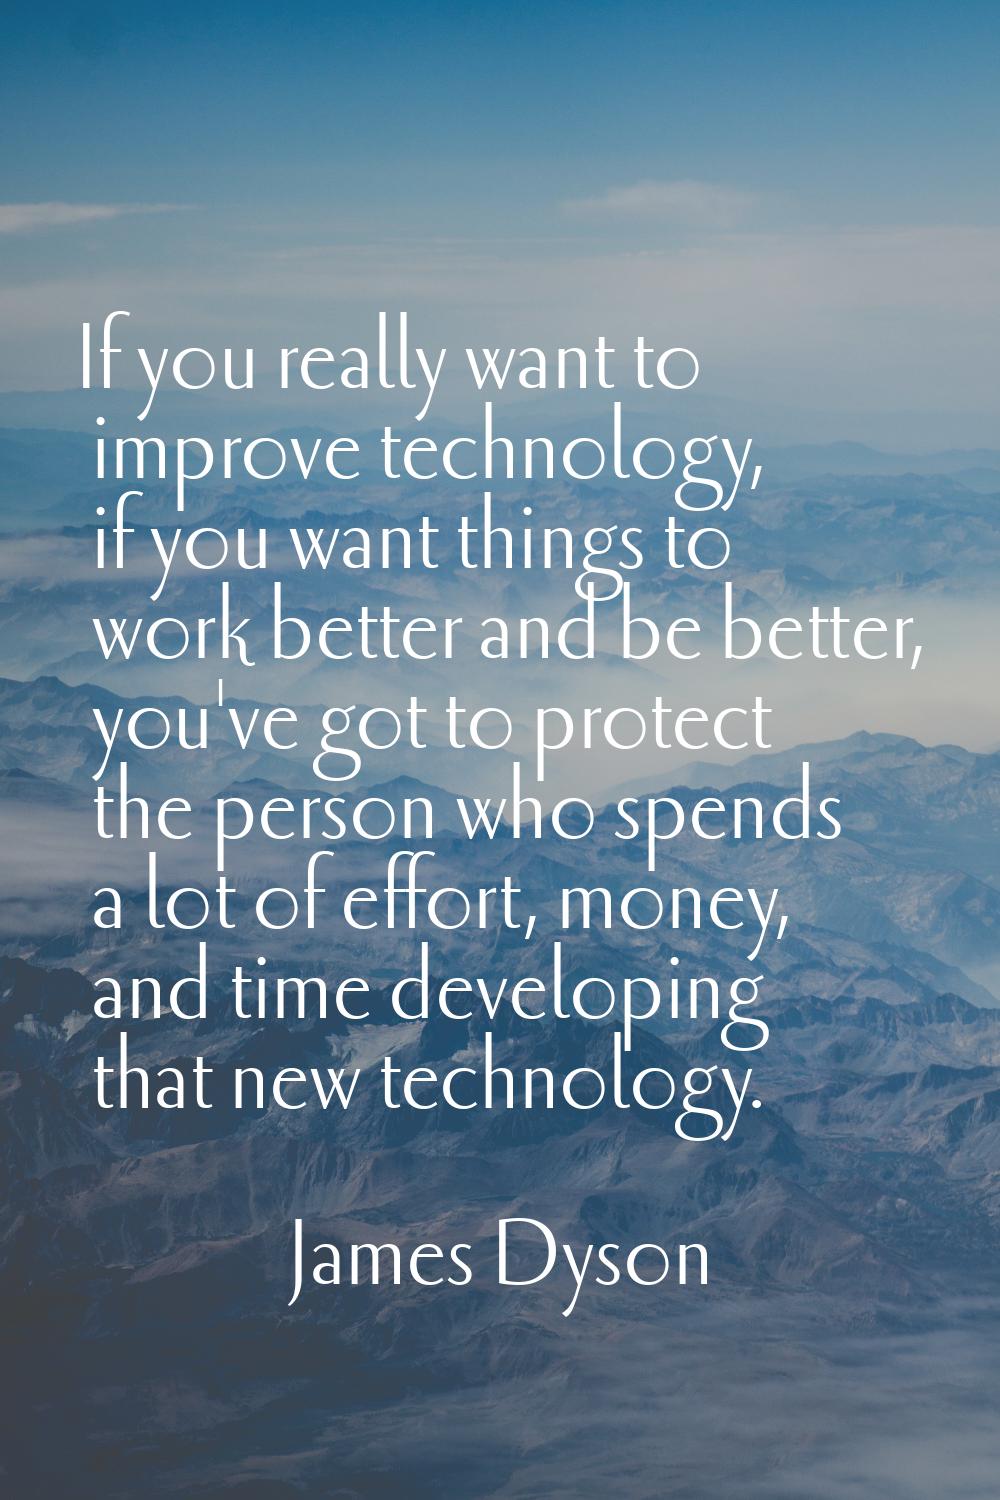 If you really want to improve technology, if you want things to work better and be better, you've g